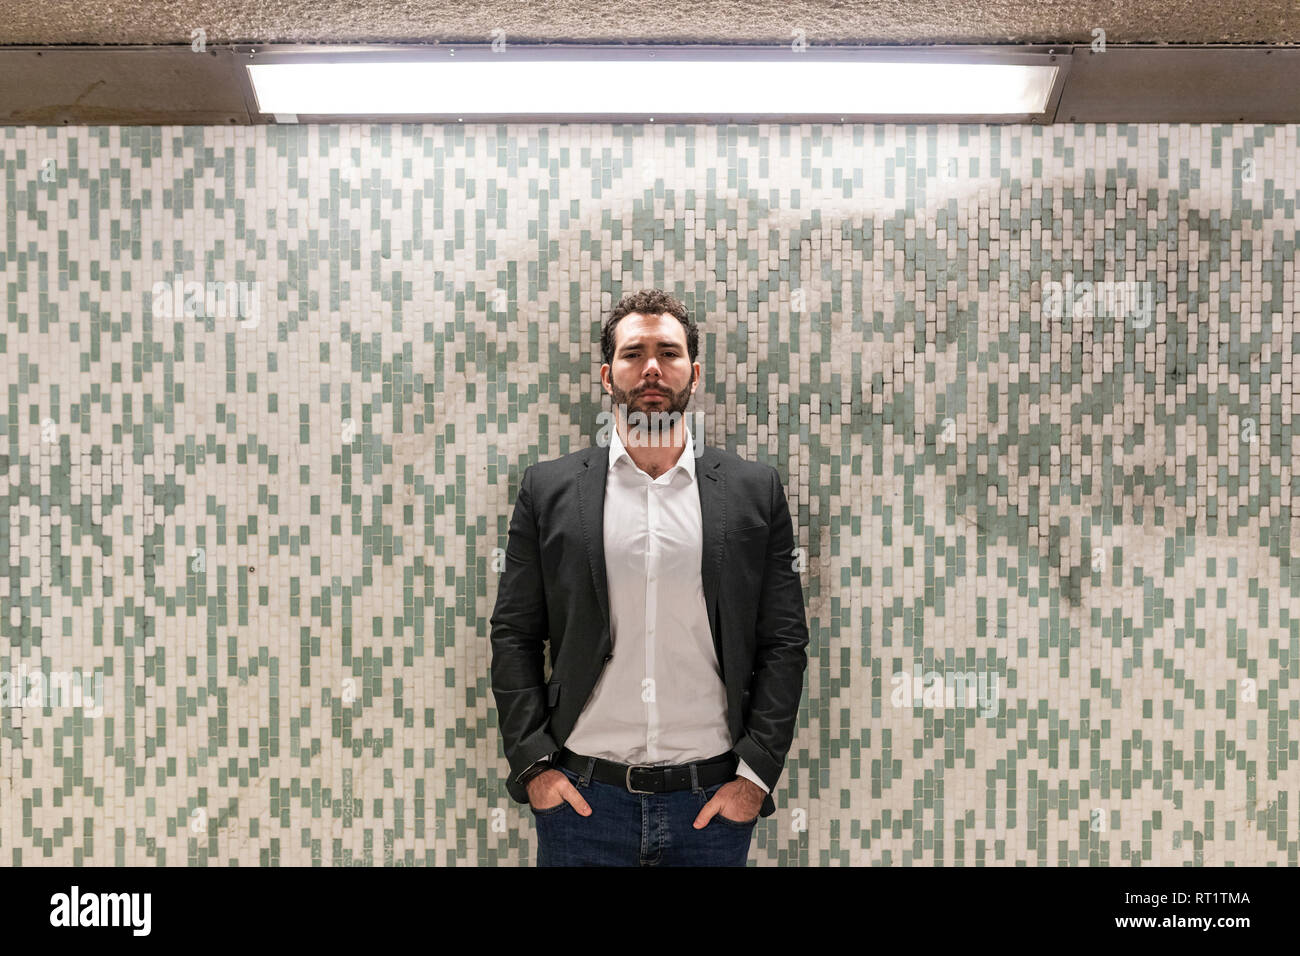 UK, London, portrait of serious businessman in an a subway passage Stock Photo